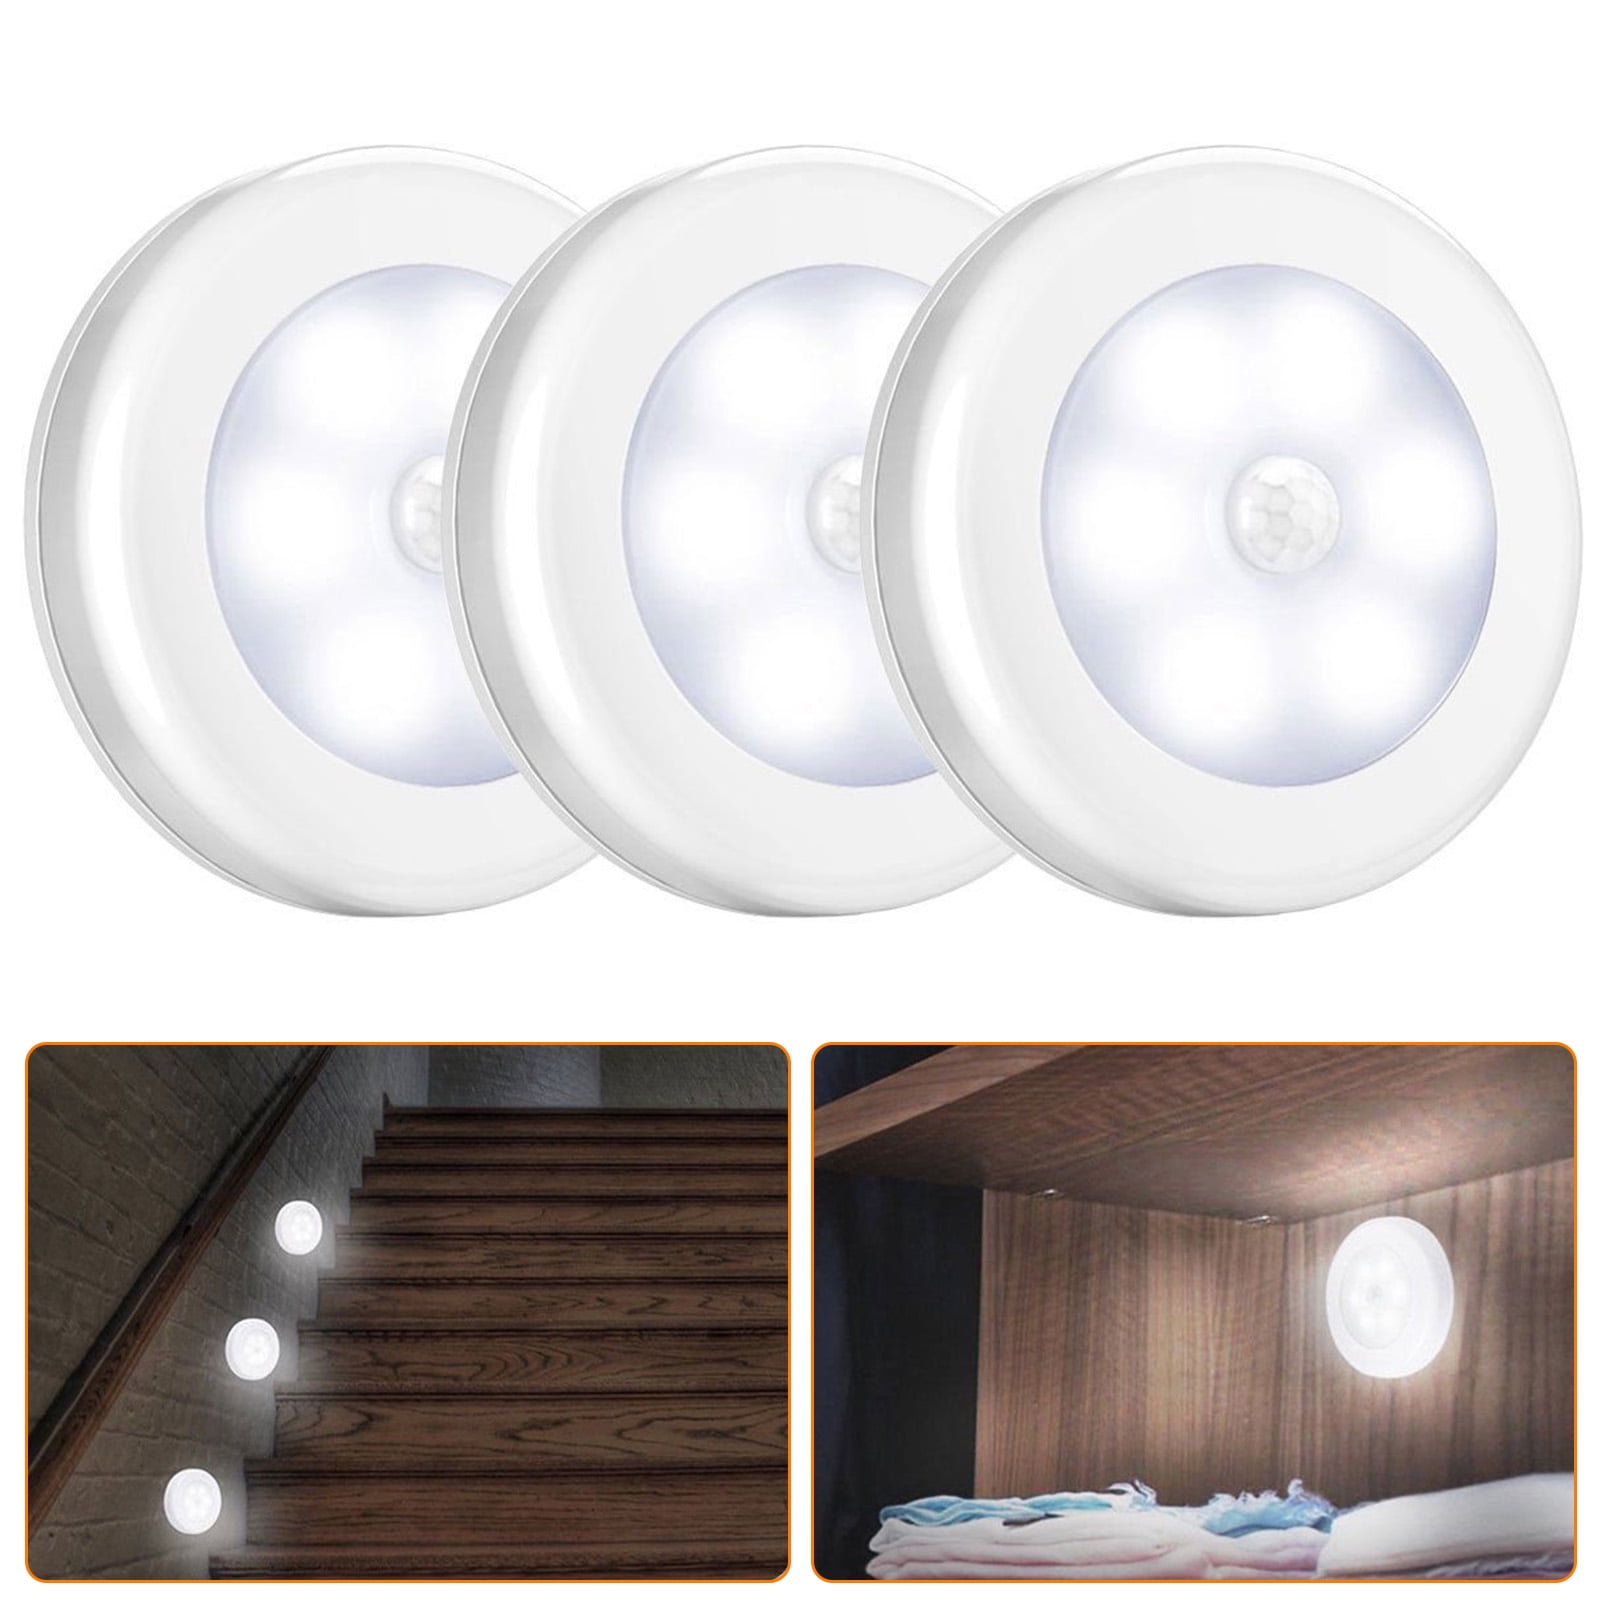 Motion Sensor White LED Night Lights Battery-Operated for Indoor/Outdoor_10 Pack 